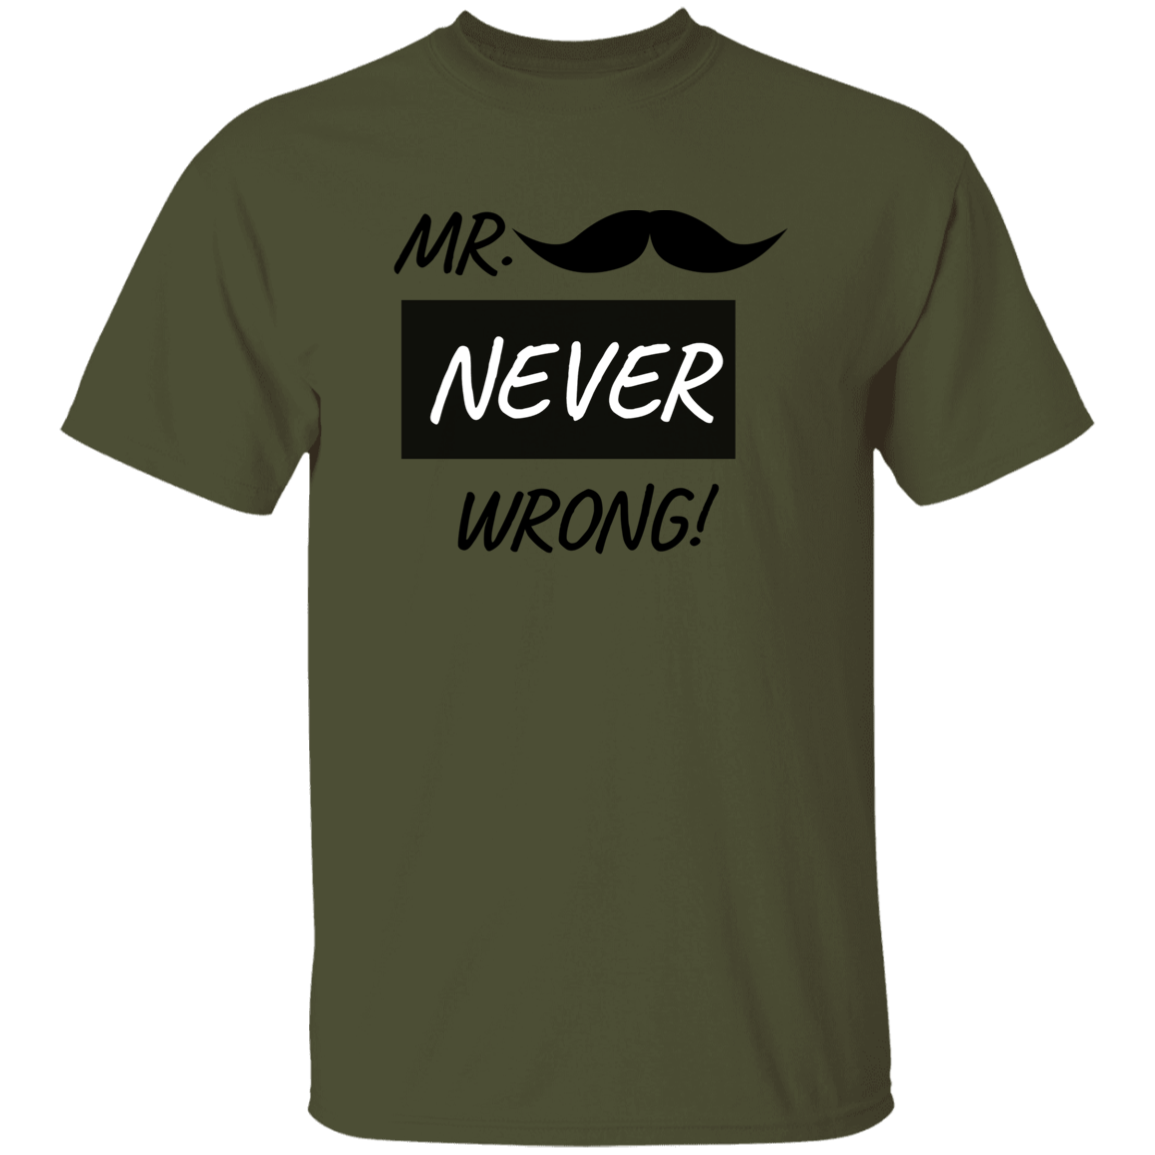 MR. Never Wrong!